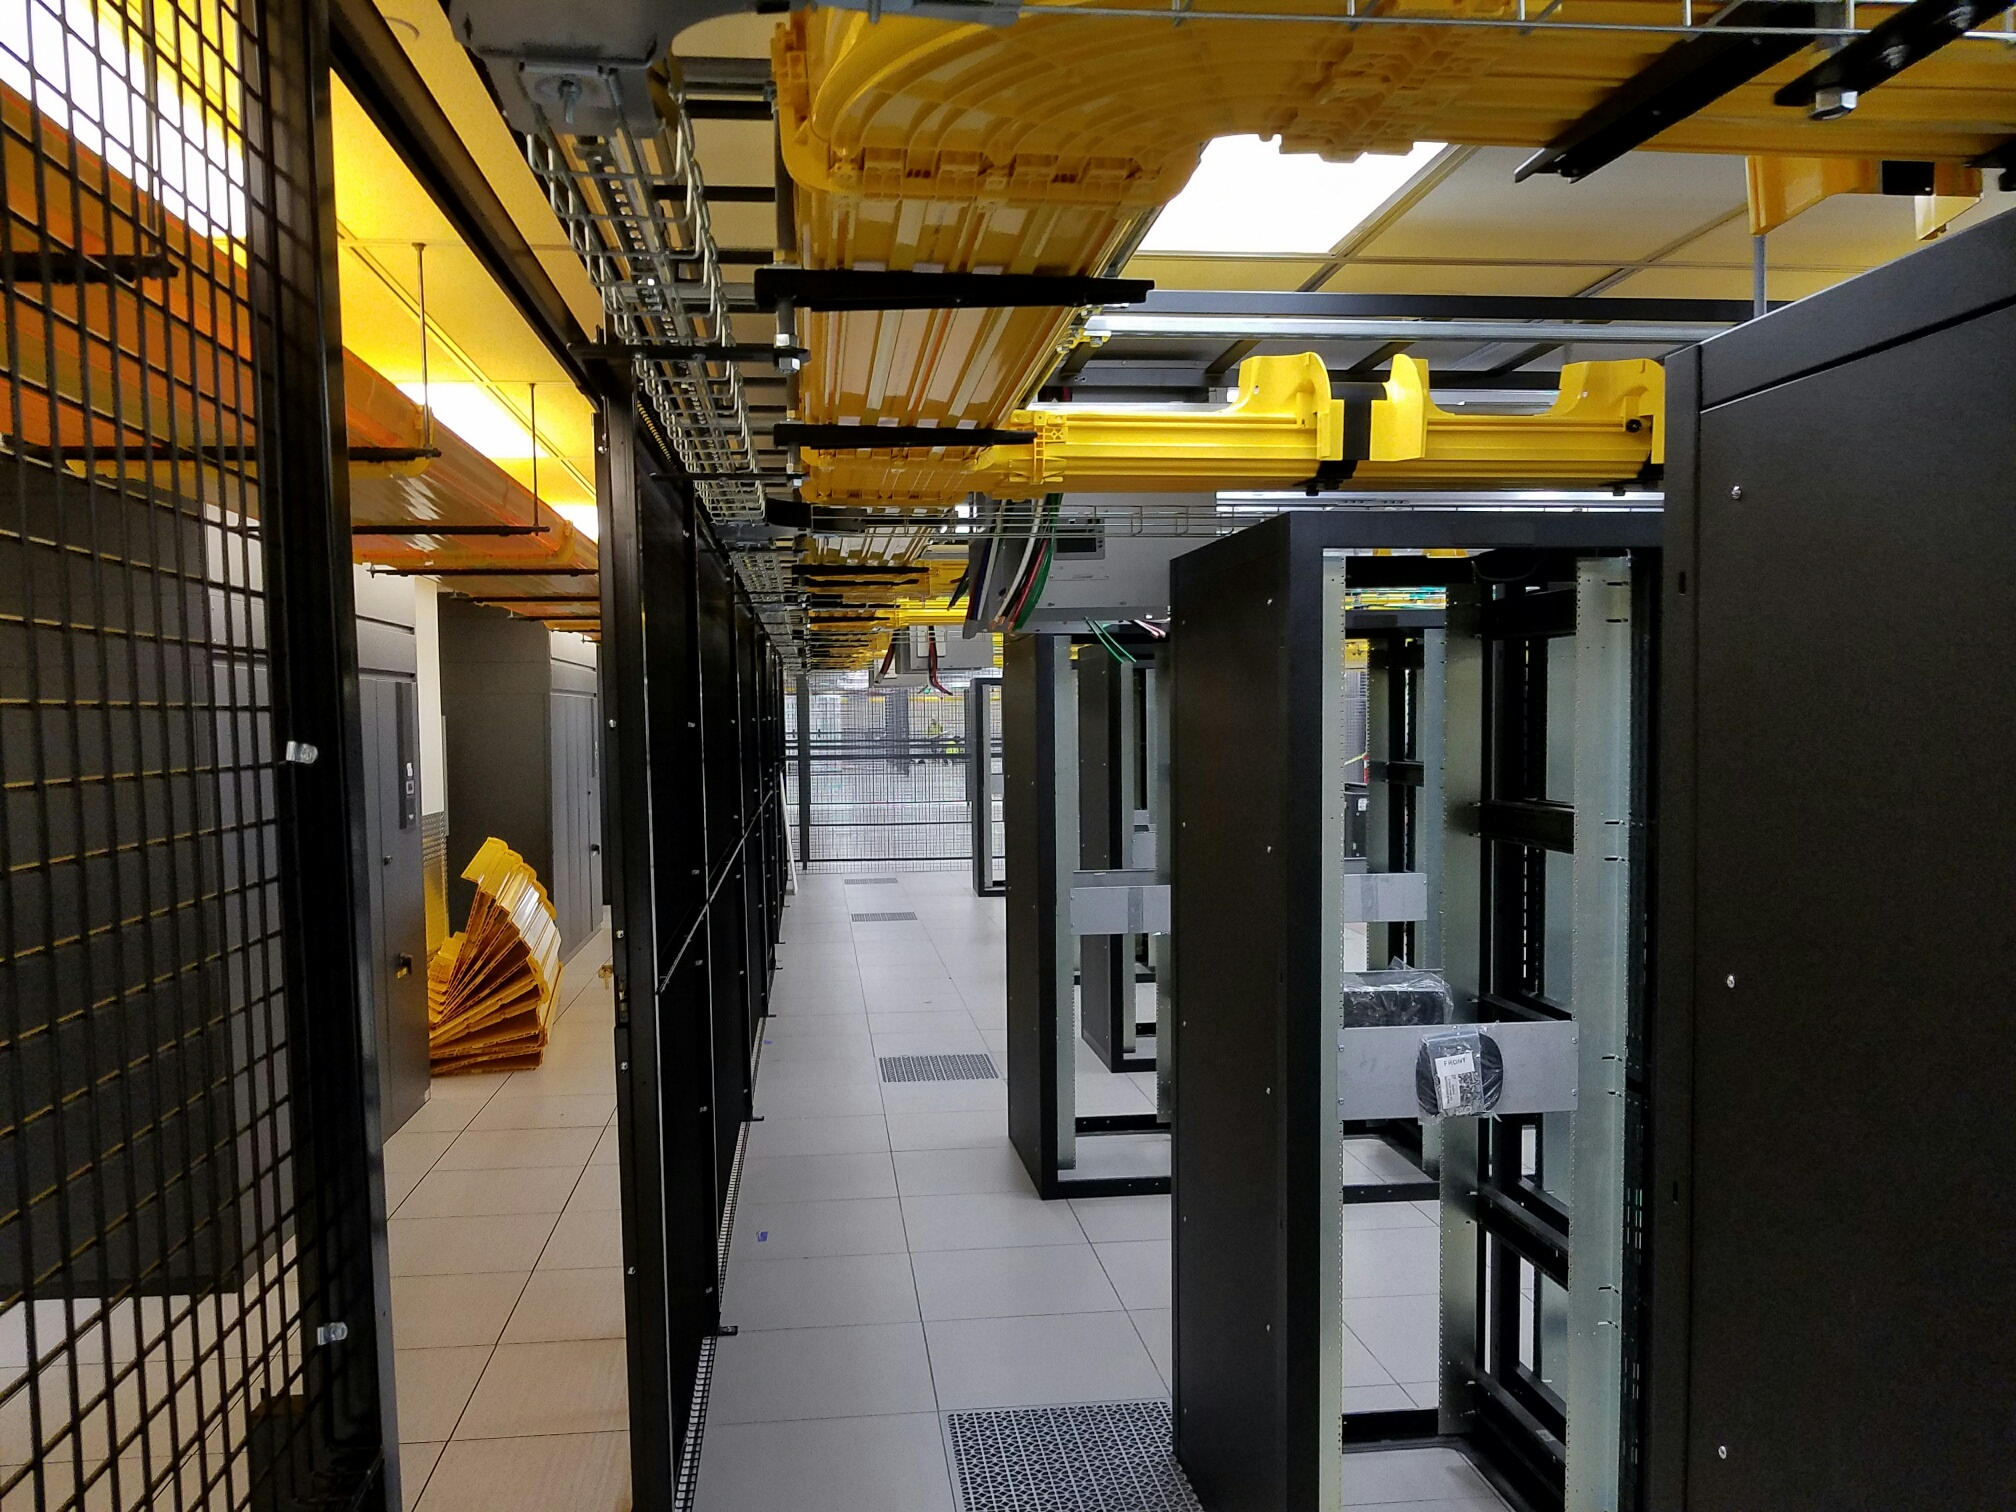 Data center fit out showing racks, overhead conveyance, cable tray and other components.